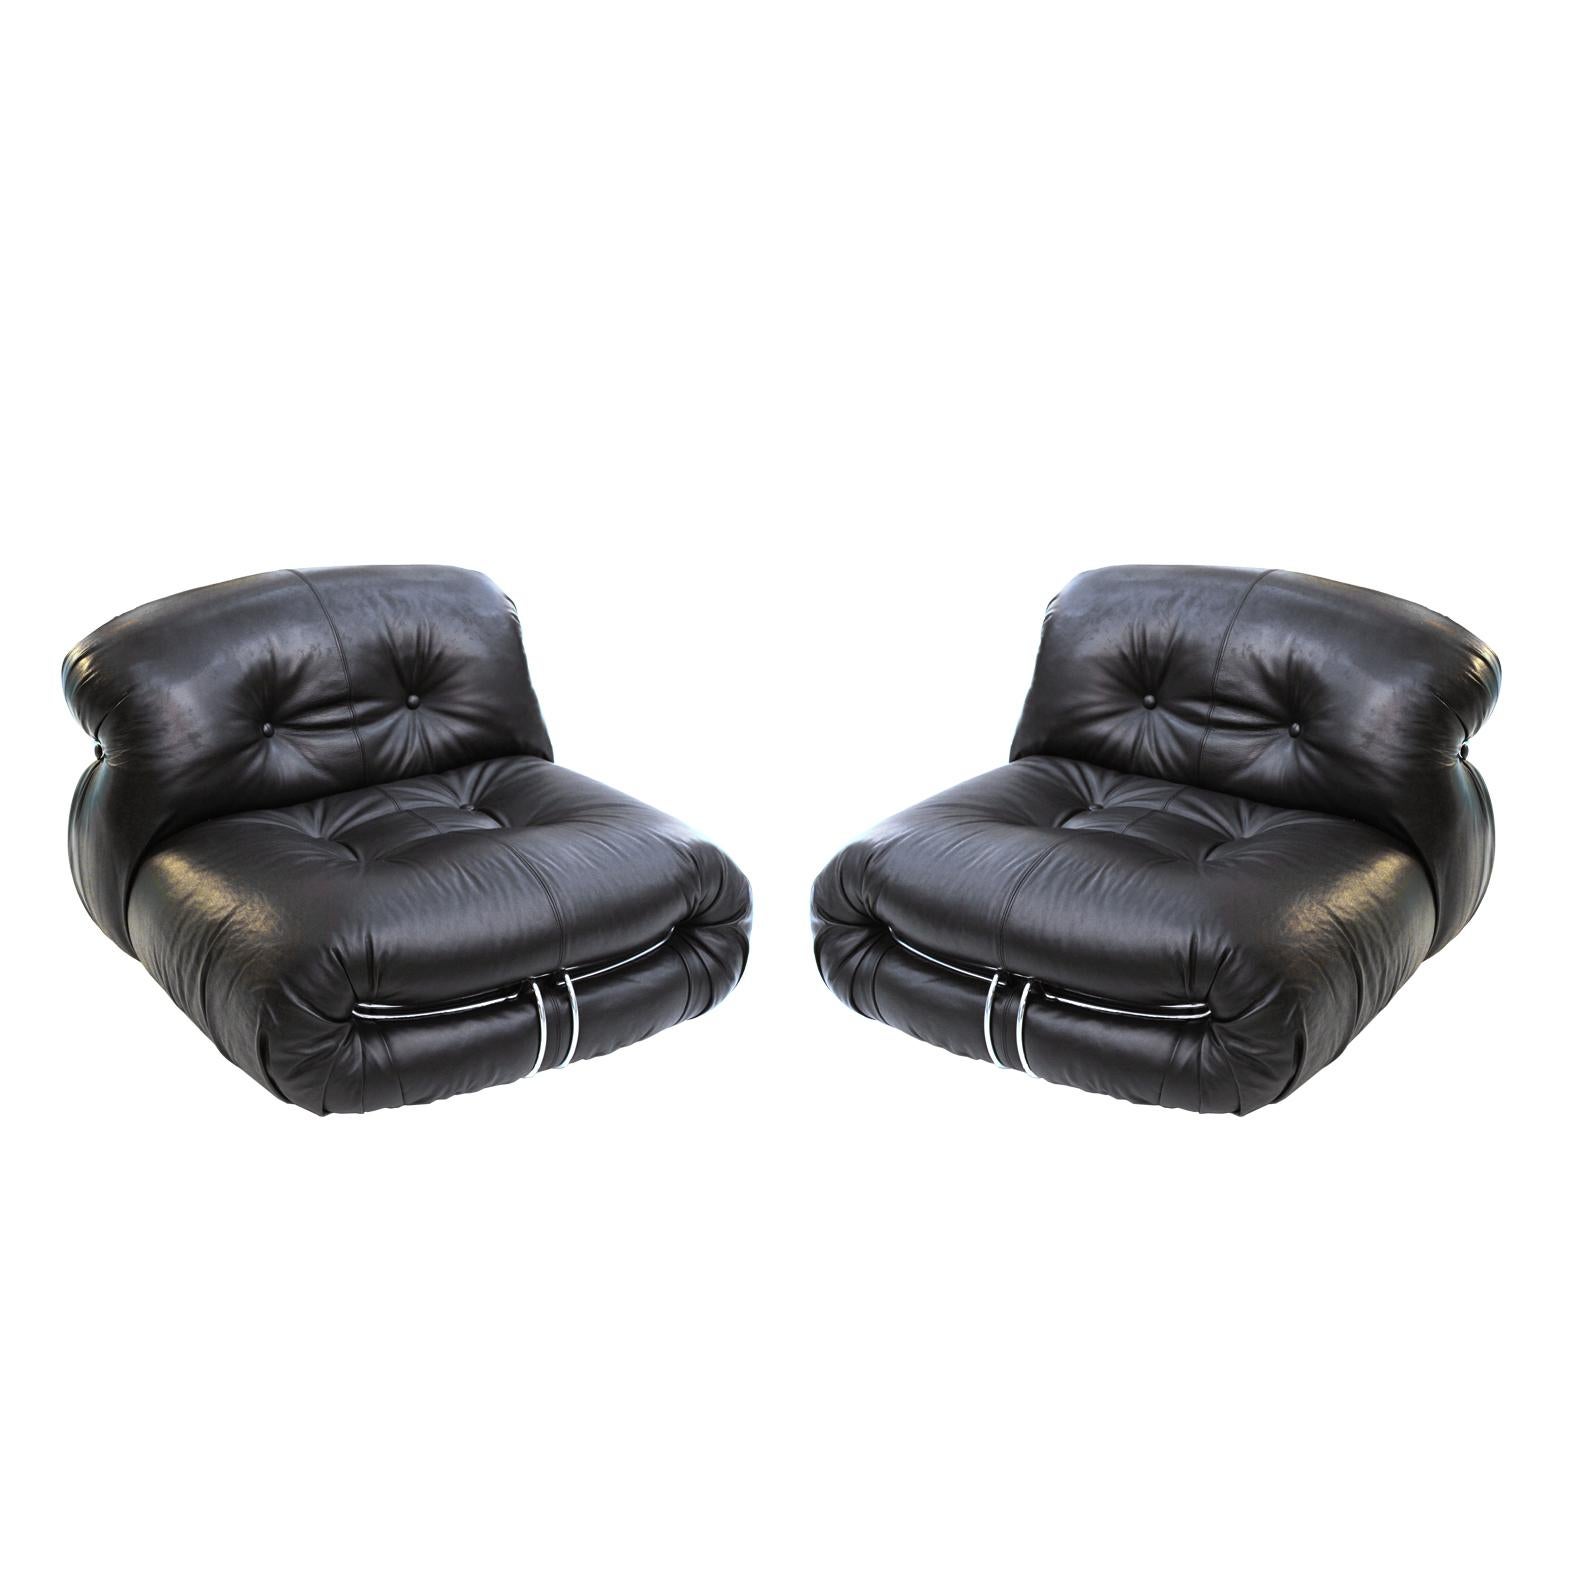 Midcentury Modern Pair of Black Leather Soriana Lounge Chairs by Tobia Scarpa For Sale